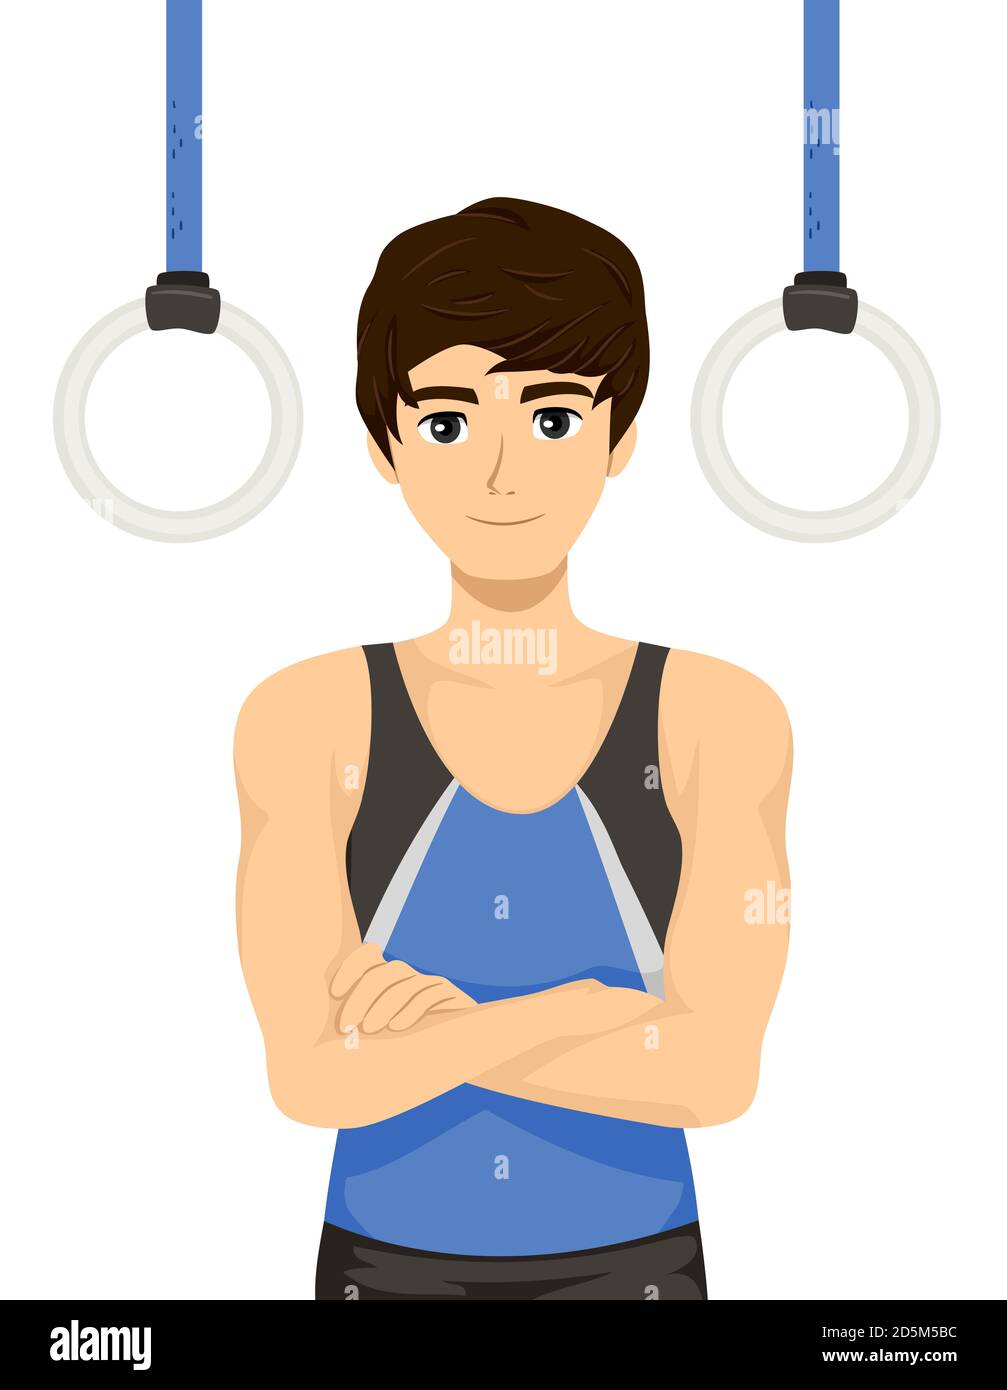 Illustration of a Teenage Guy Gymnast Standing Between Two Gymnastics Rings Stock Photo